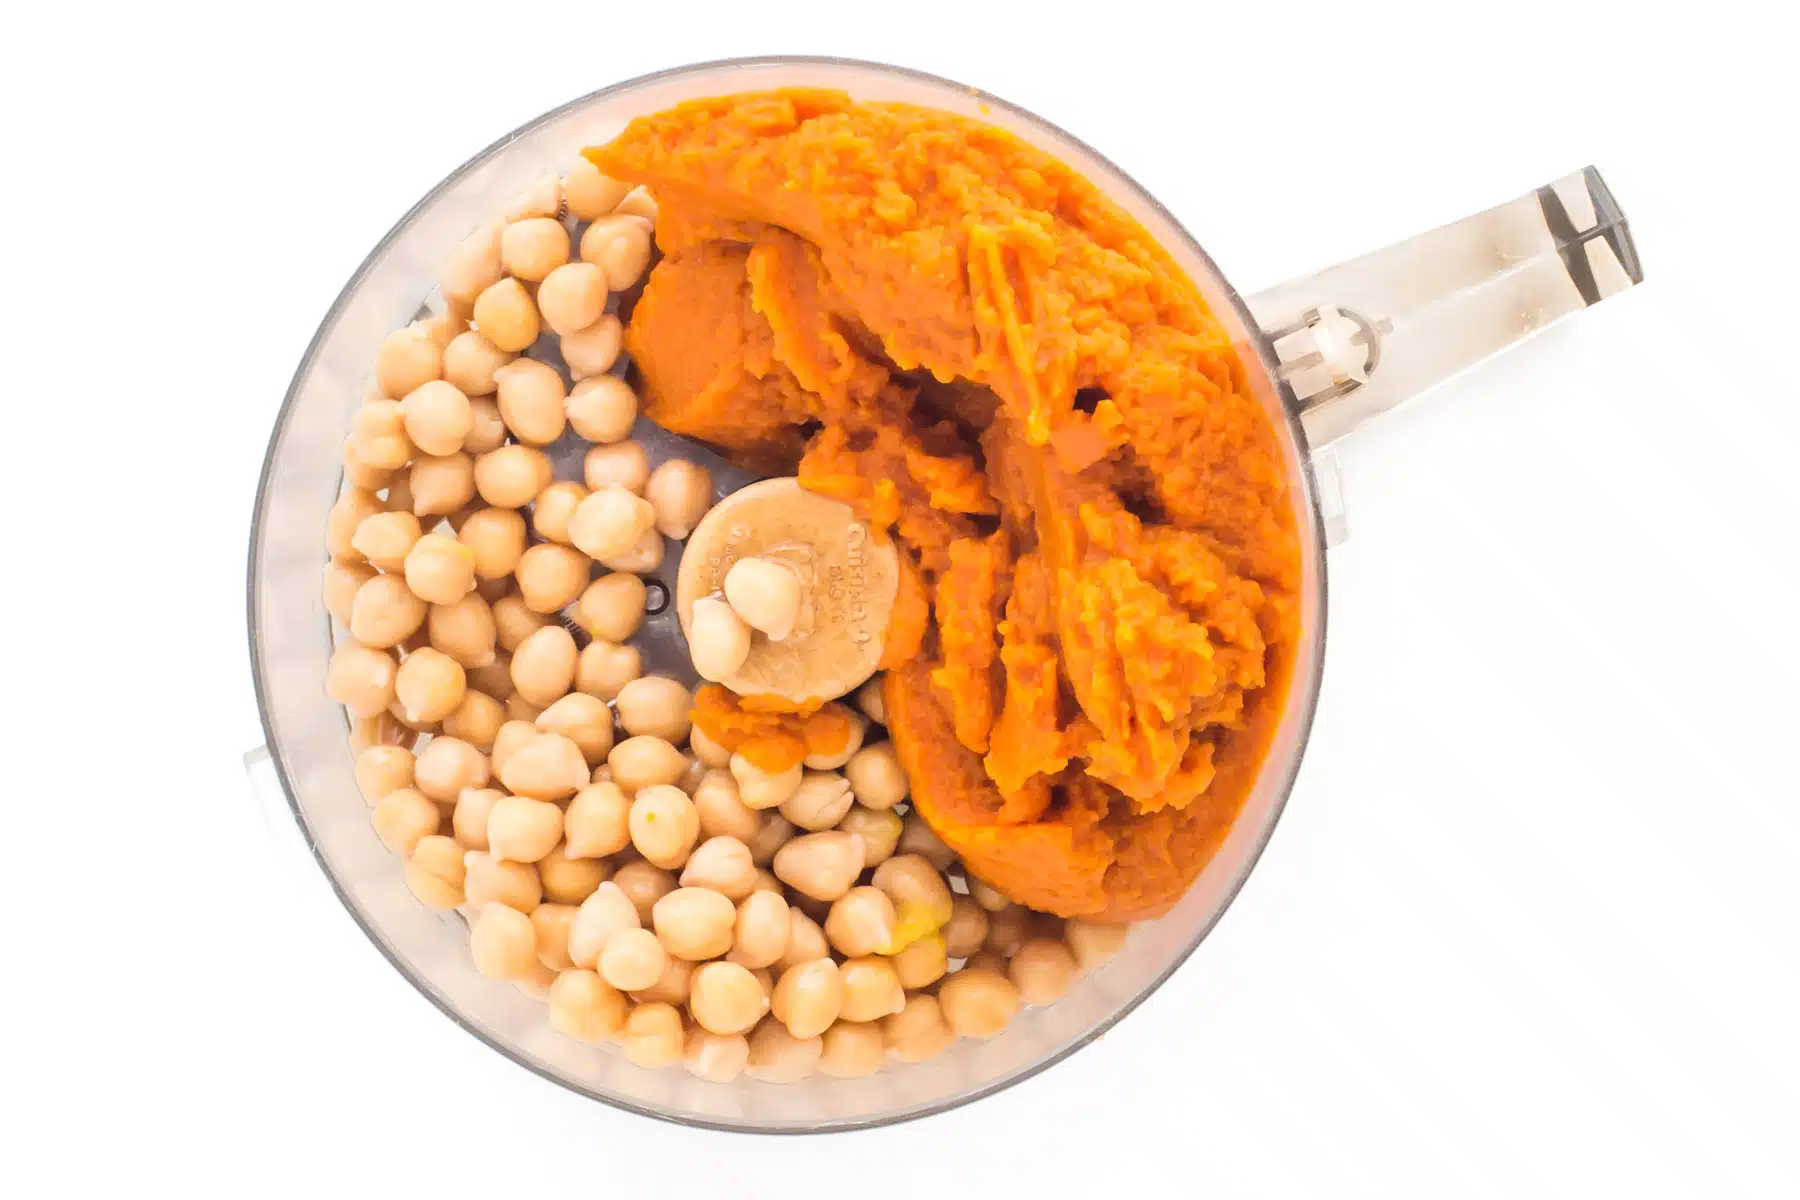 Looking down on a food processor full of chickpeas and pumpkin puree.